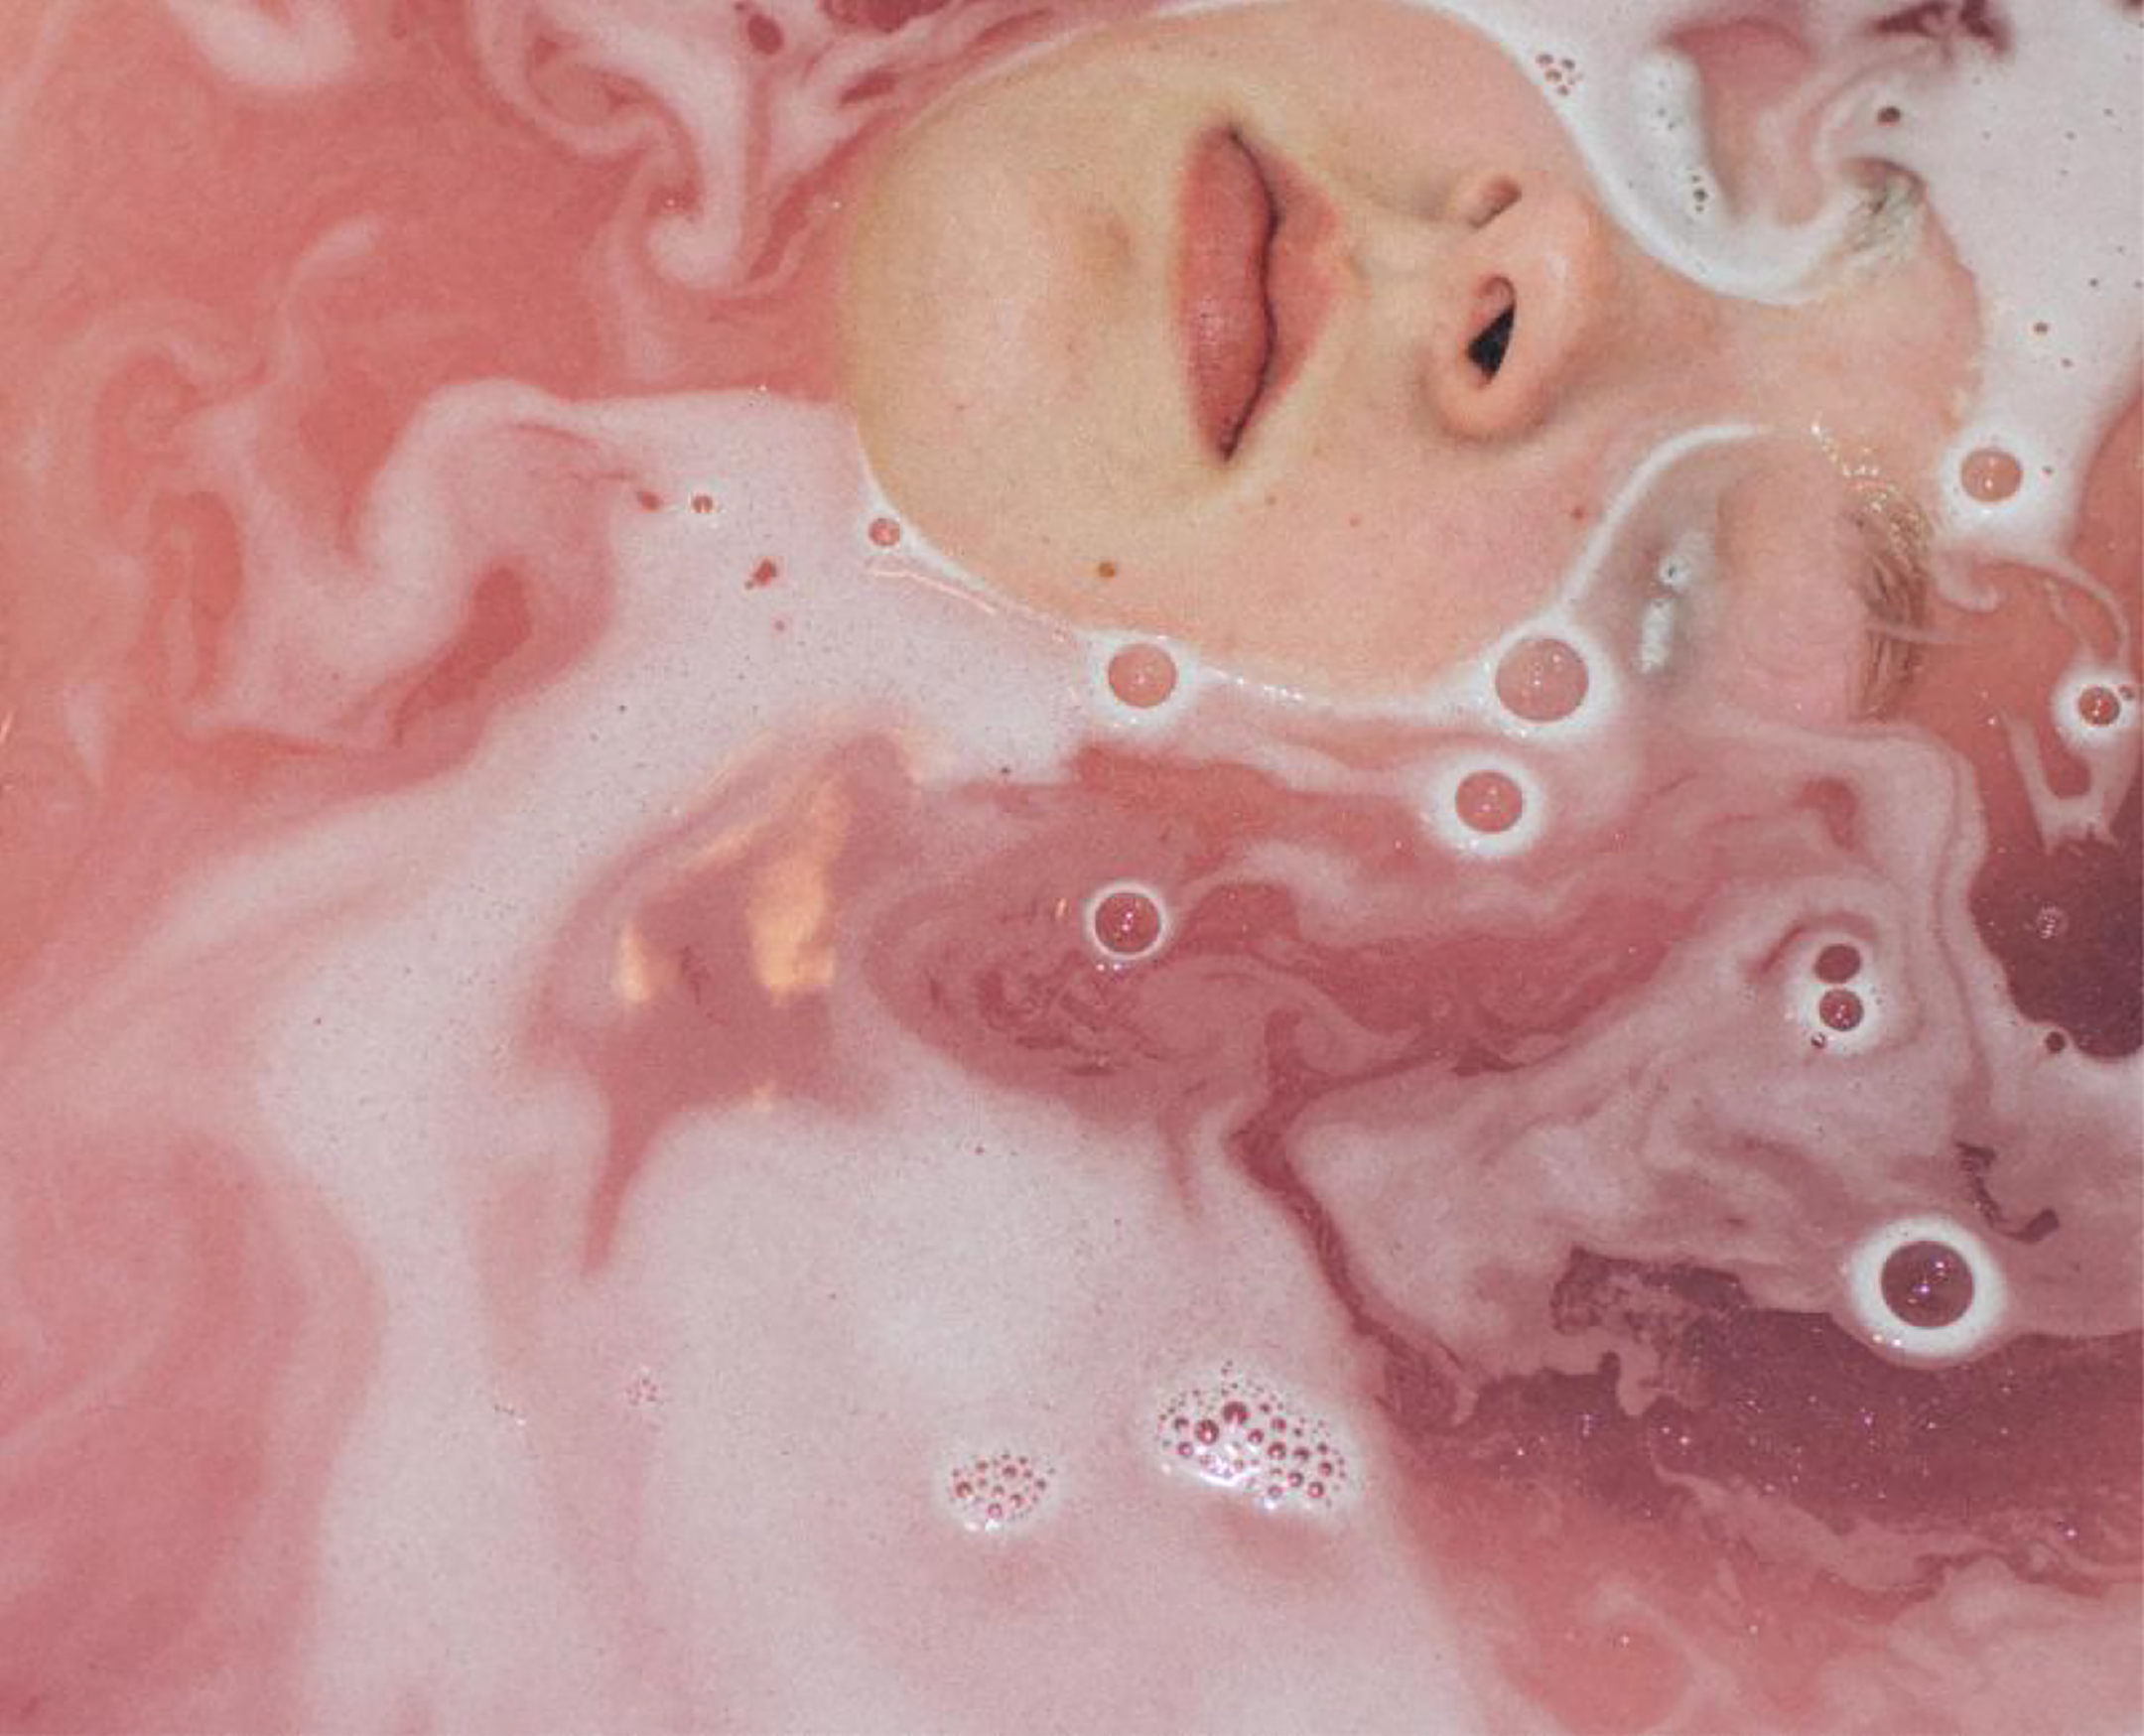 An abstract photo self-portrait of a young woman's face peeking out from below pink water